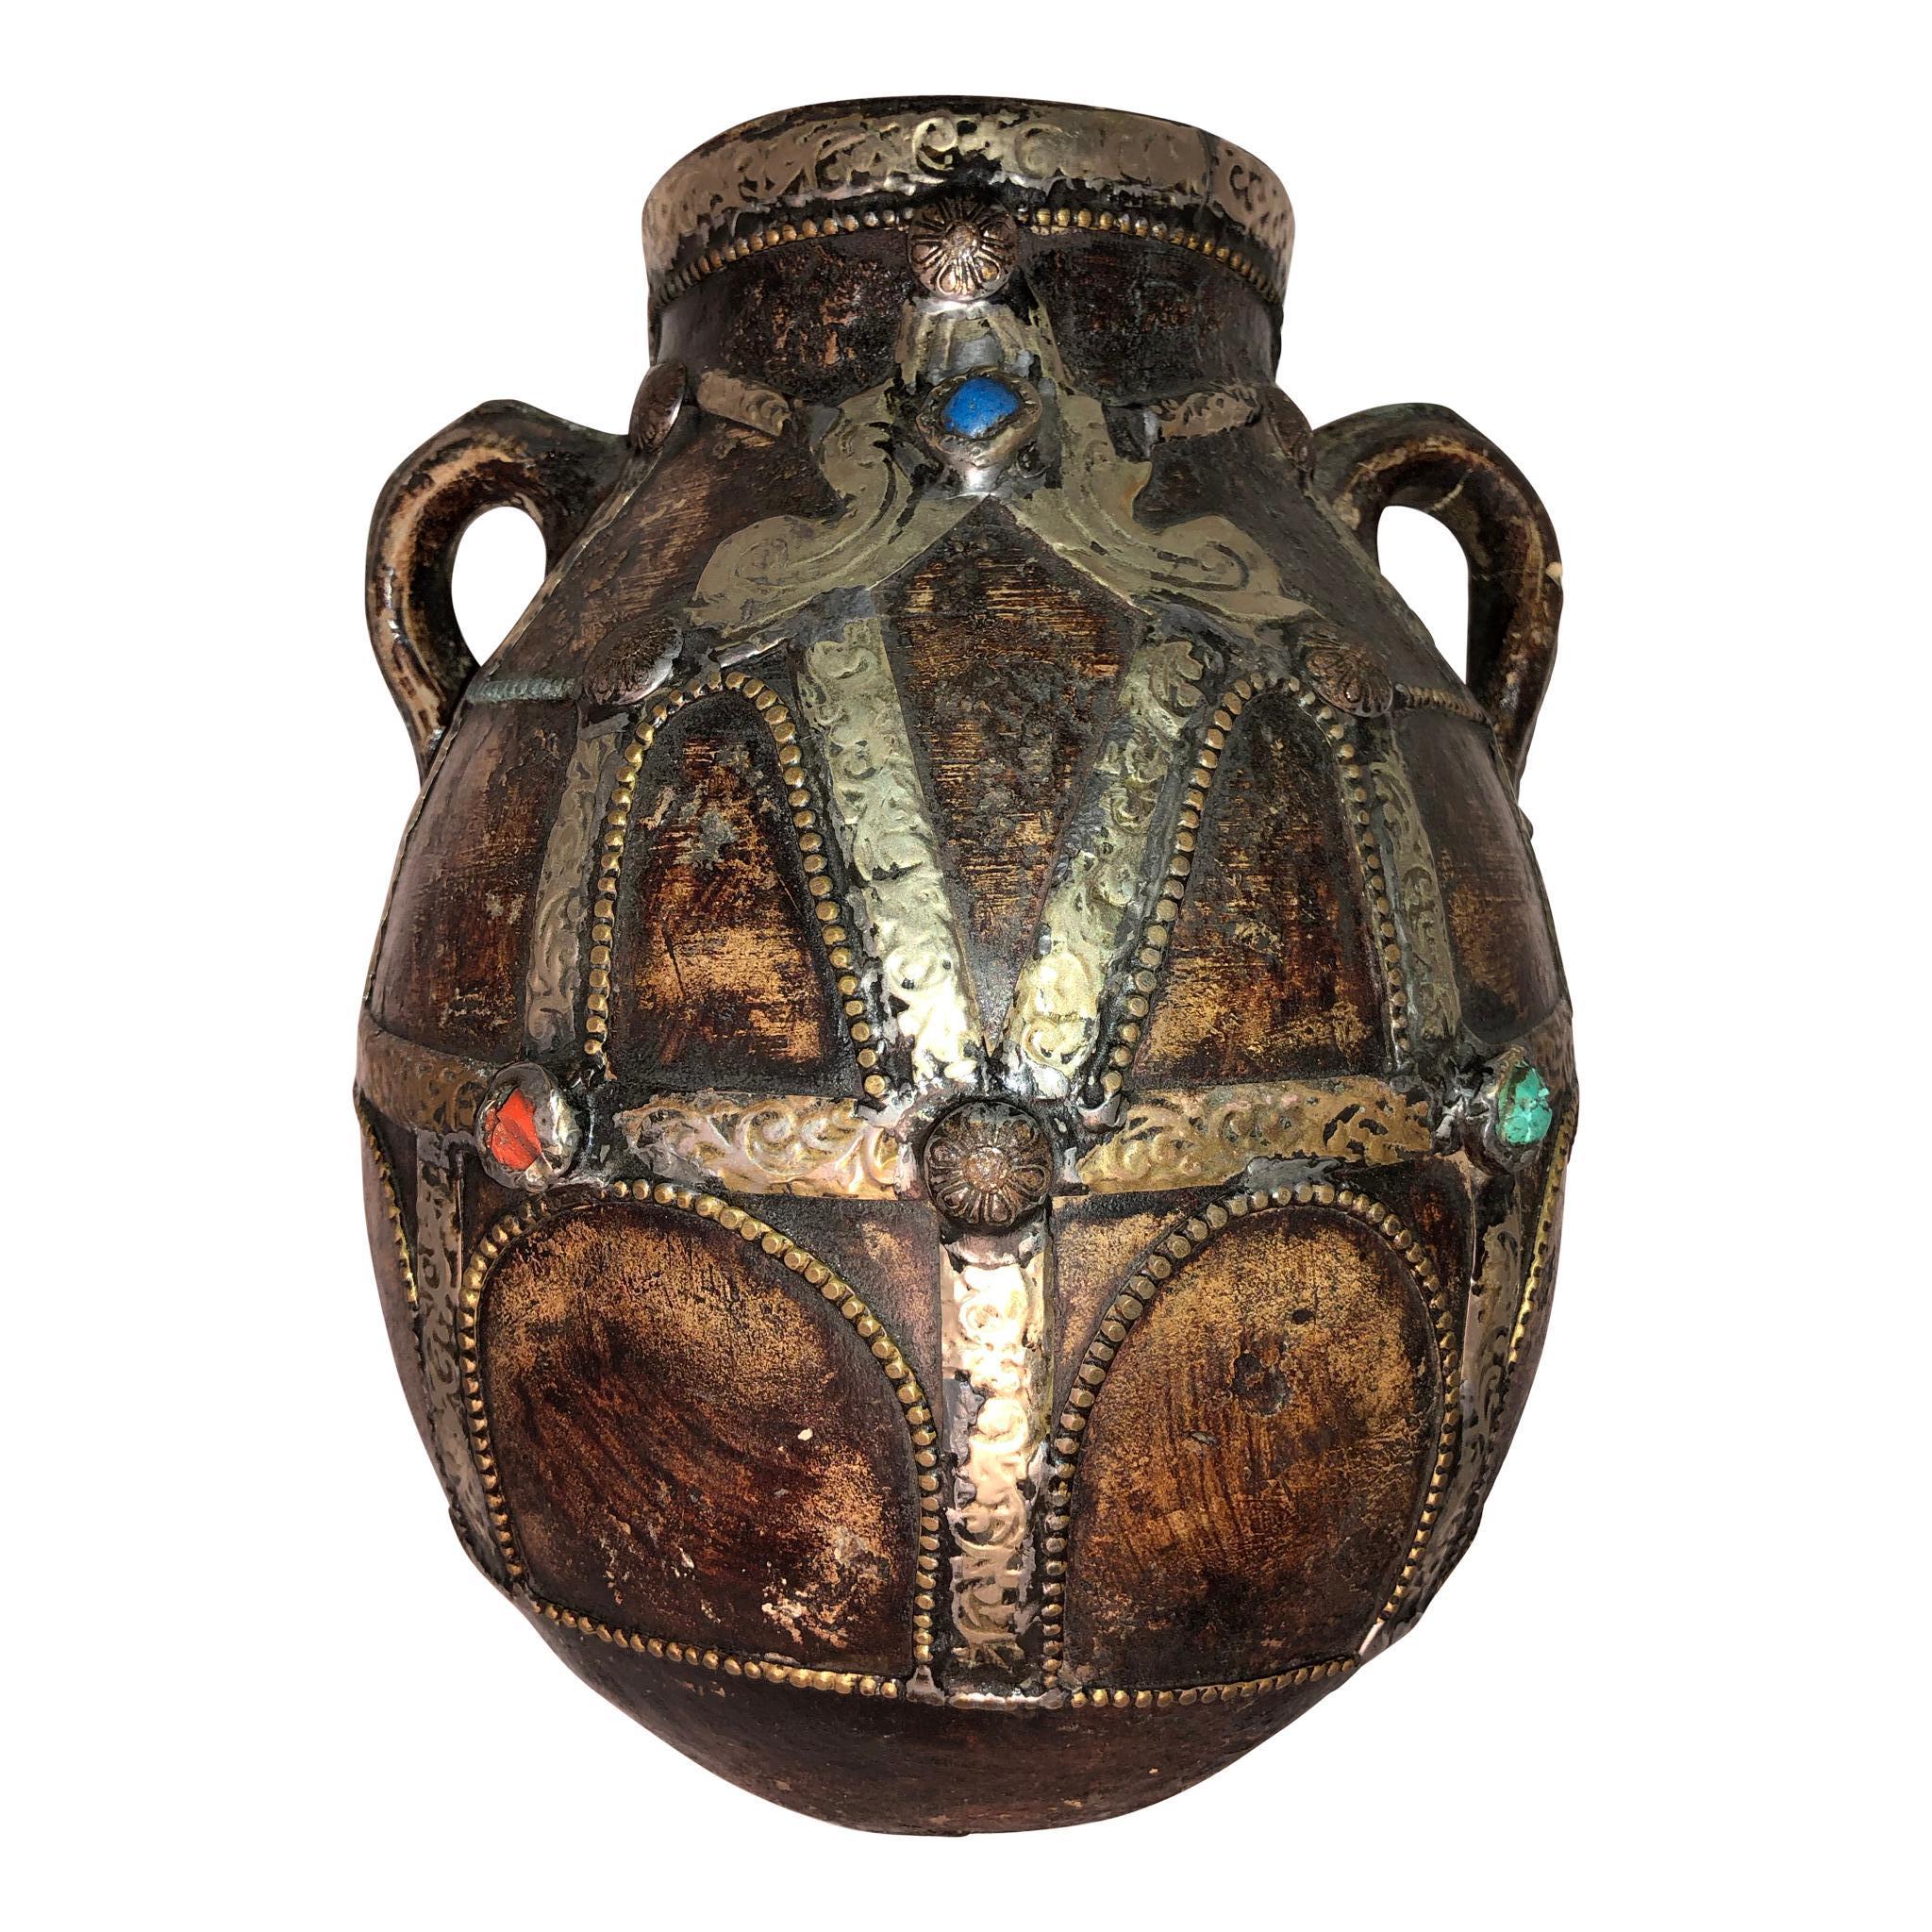 This large Moroccan two-handled jug is heavily decorated in Moroccan silver and copper. Both sides feature a coral bead, a bead of Lapis Lazuli, and a turquoise bead. Made of heavy thick pottery from the Draa Valley of southern Morocco in the early